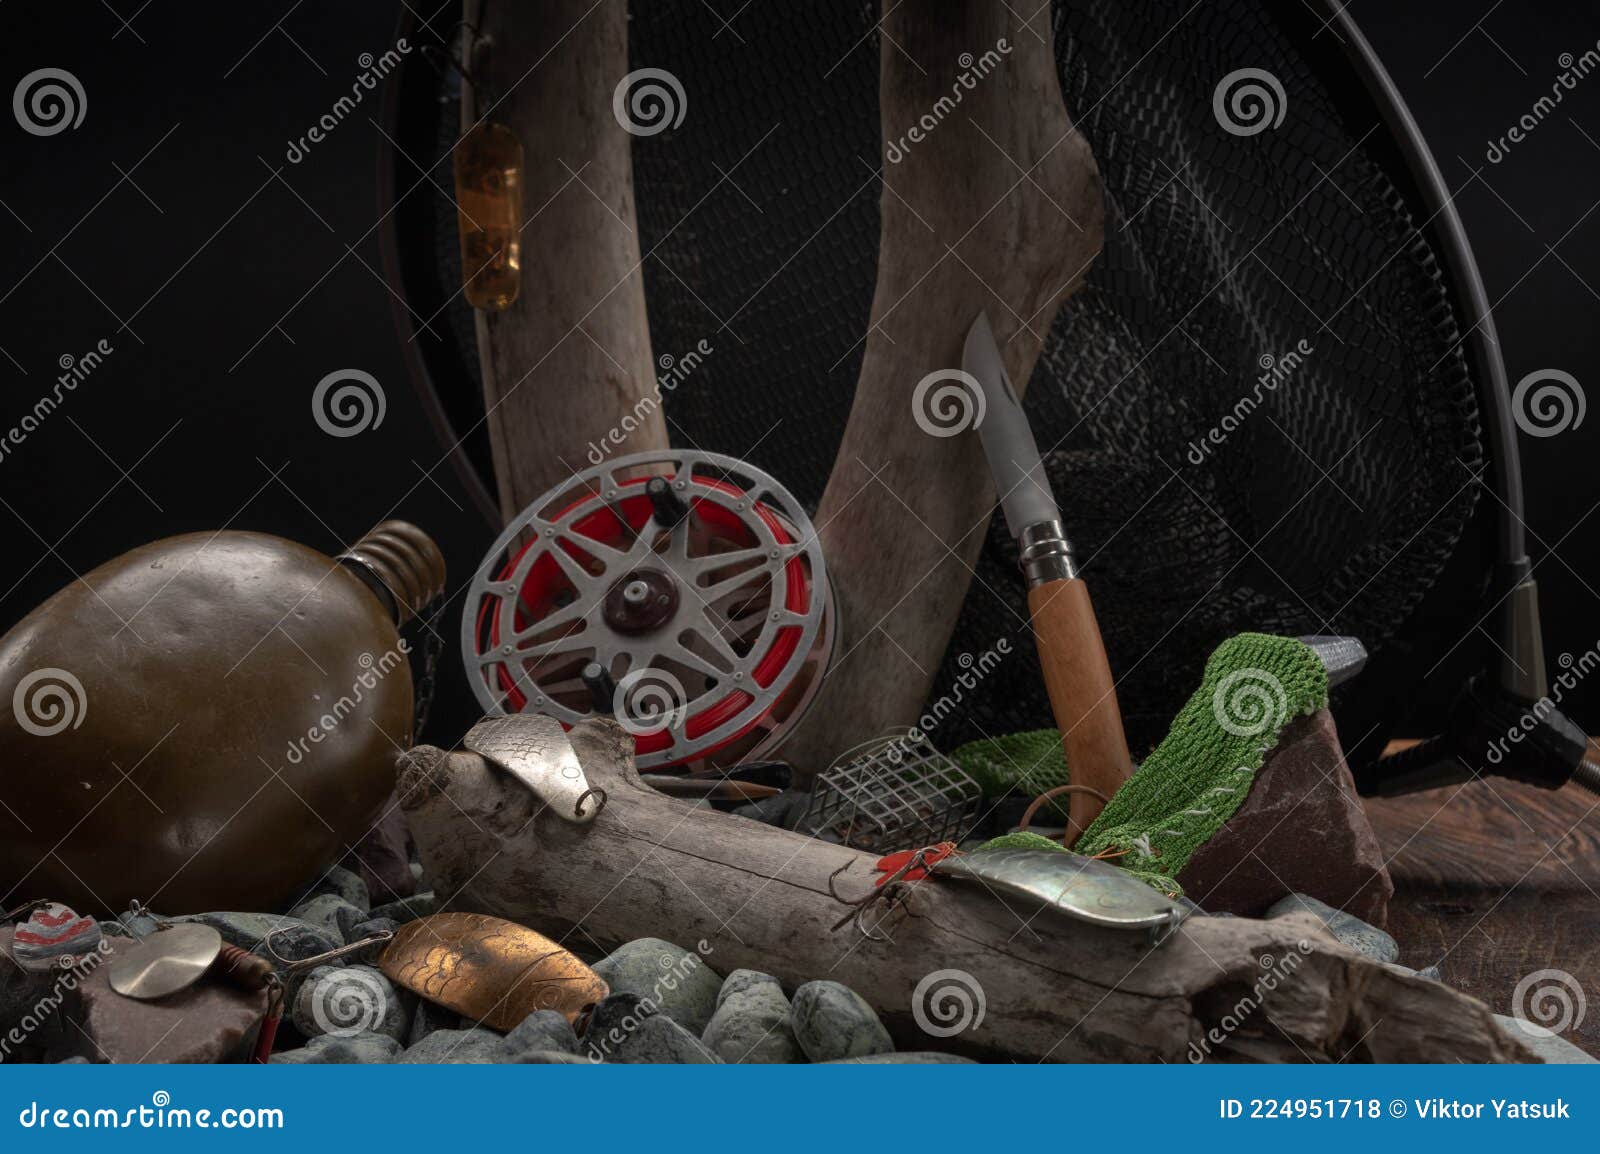 https://thumbs.dreamstime.com/z/fishing-still-life-old-tackle-tree-stump-stones-vintage-stuff-front-view-224951718.jpg